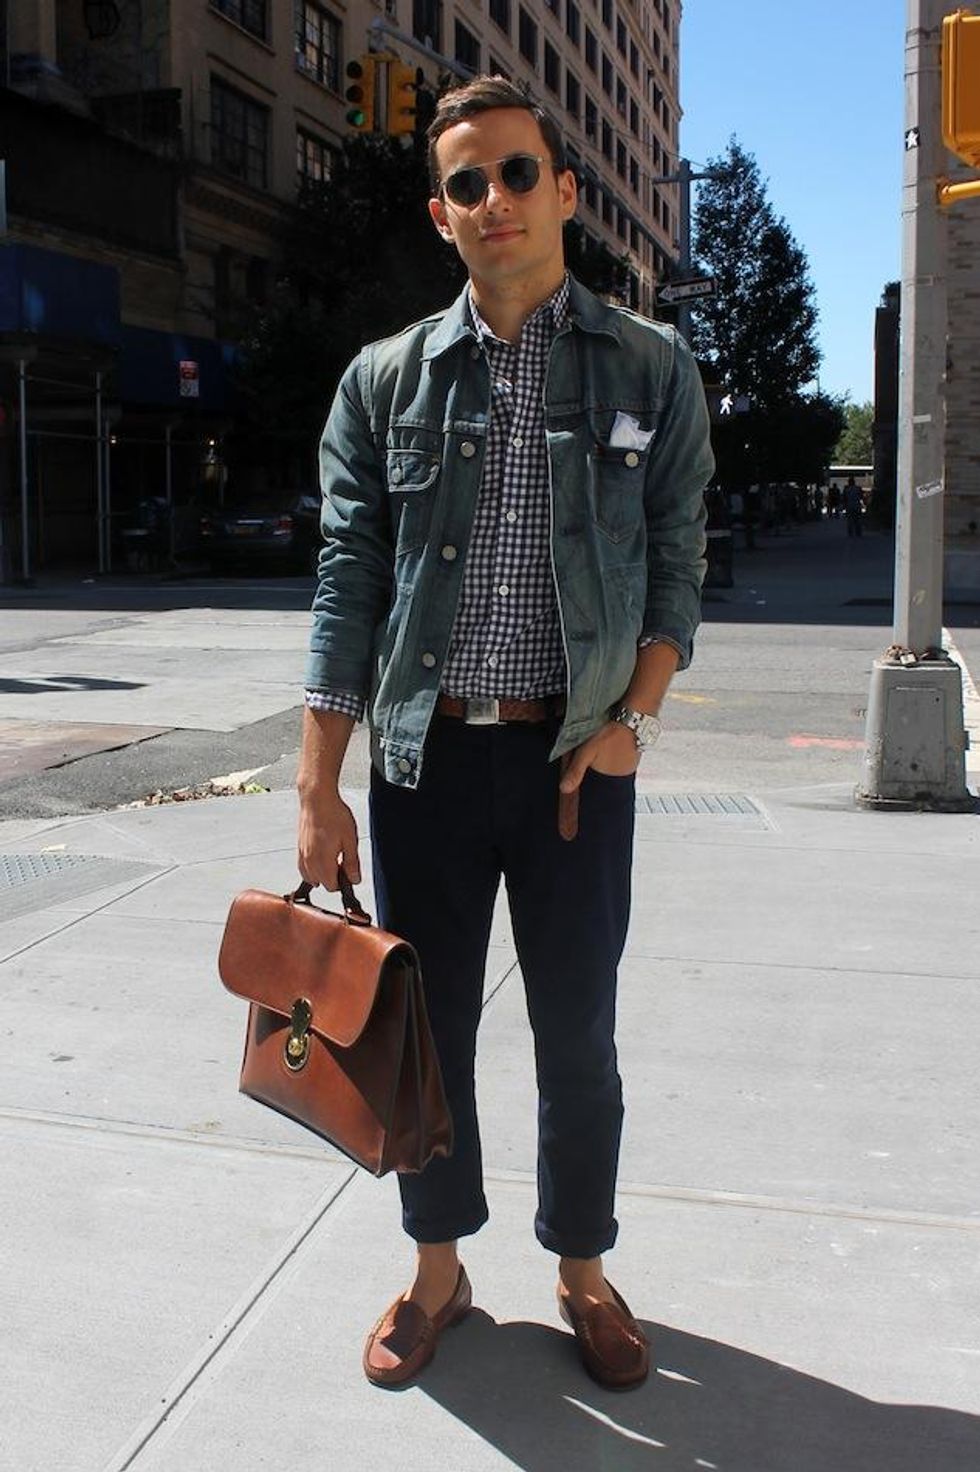 OUT On The Street: Upgraded Denim